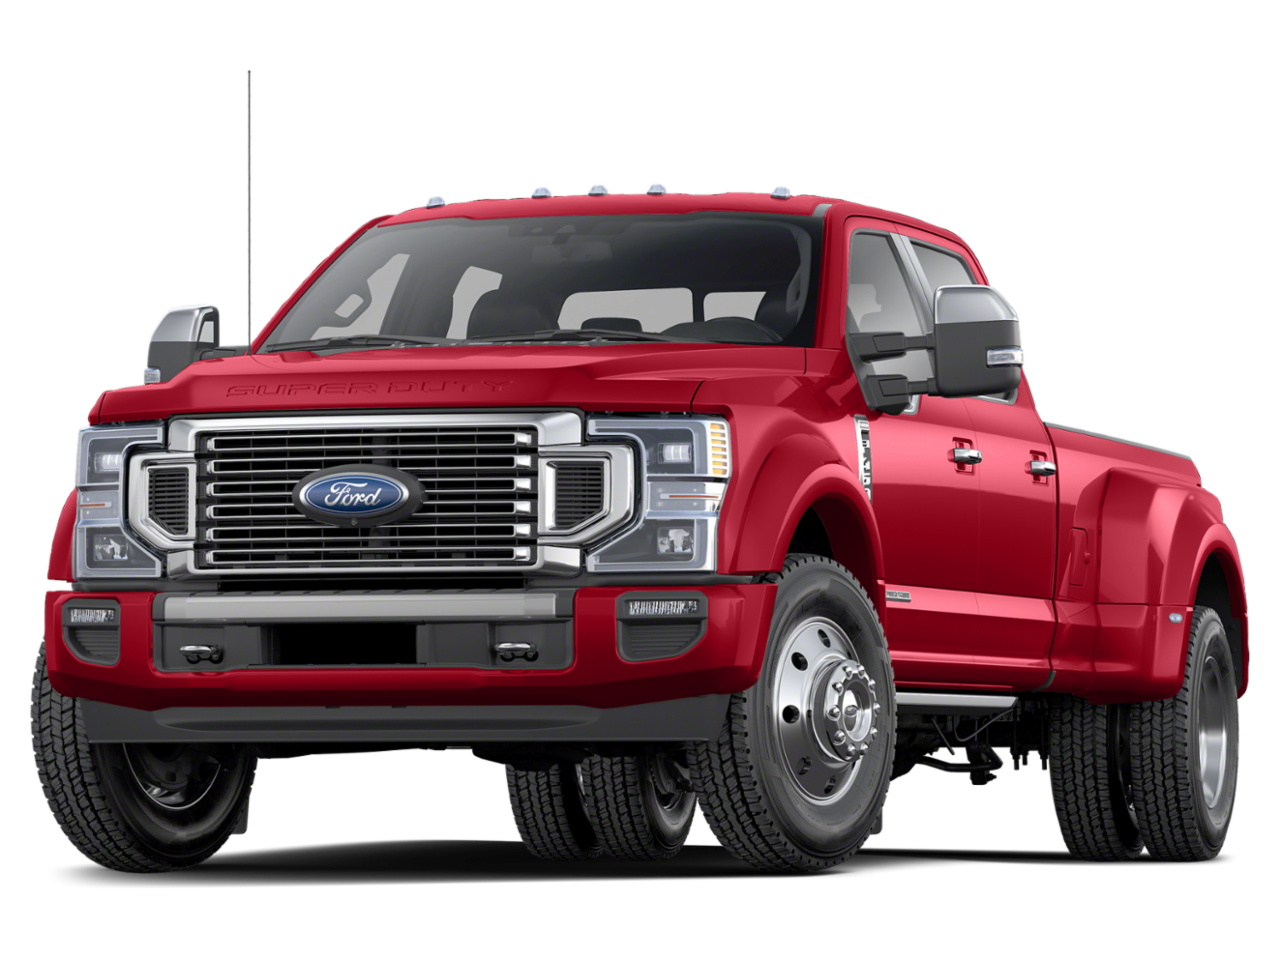 Paul Thigpen Ford of Waynesboro is a Ford dealer selling new and used